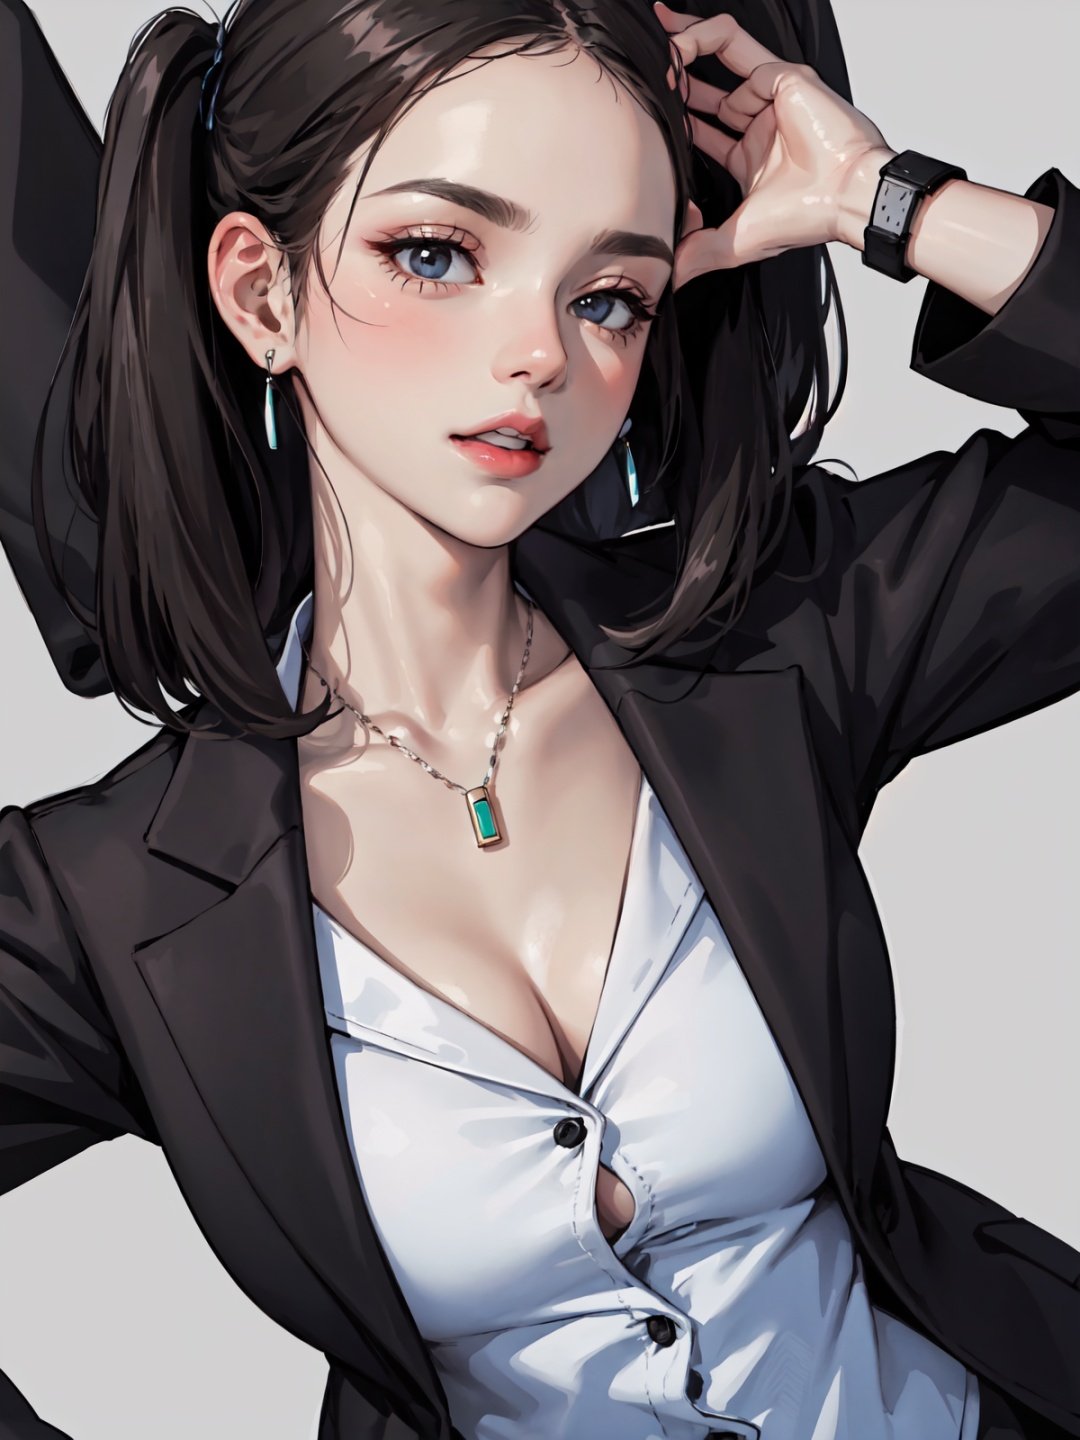 (masterpiece:1.2, best quality), 1milf, solo, (upper body), latexskin, close-up, open chested, curvy
bobbed hair,
black blazer with white shirt,
Sleek and polished with a bold lip color
Timeless watch and minimalistic jewelry
Sleek, straight hair
in office